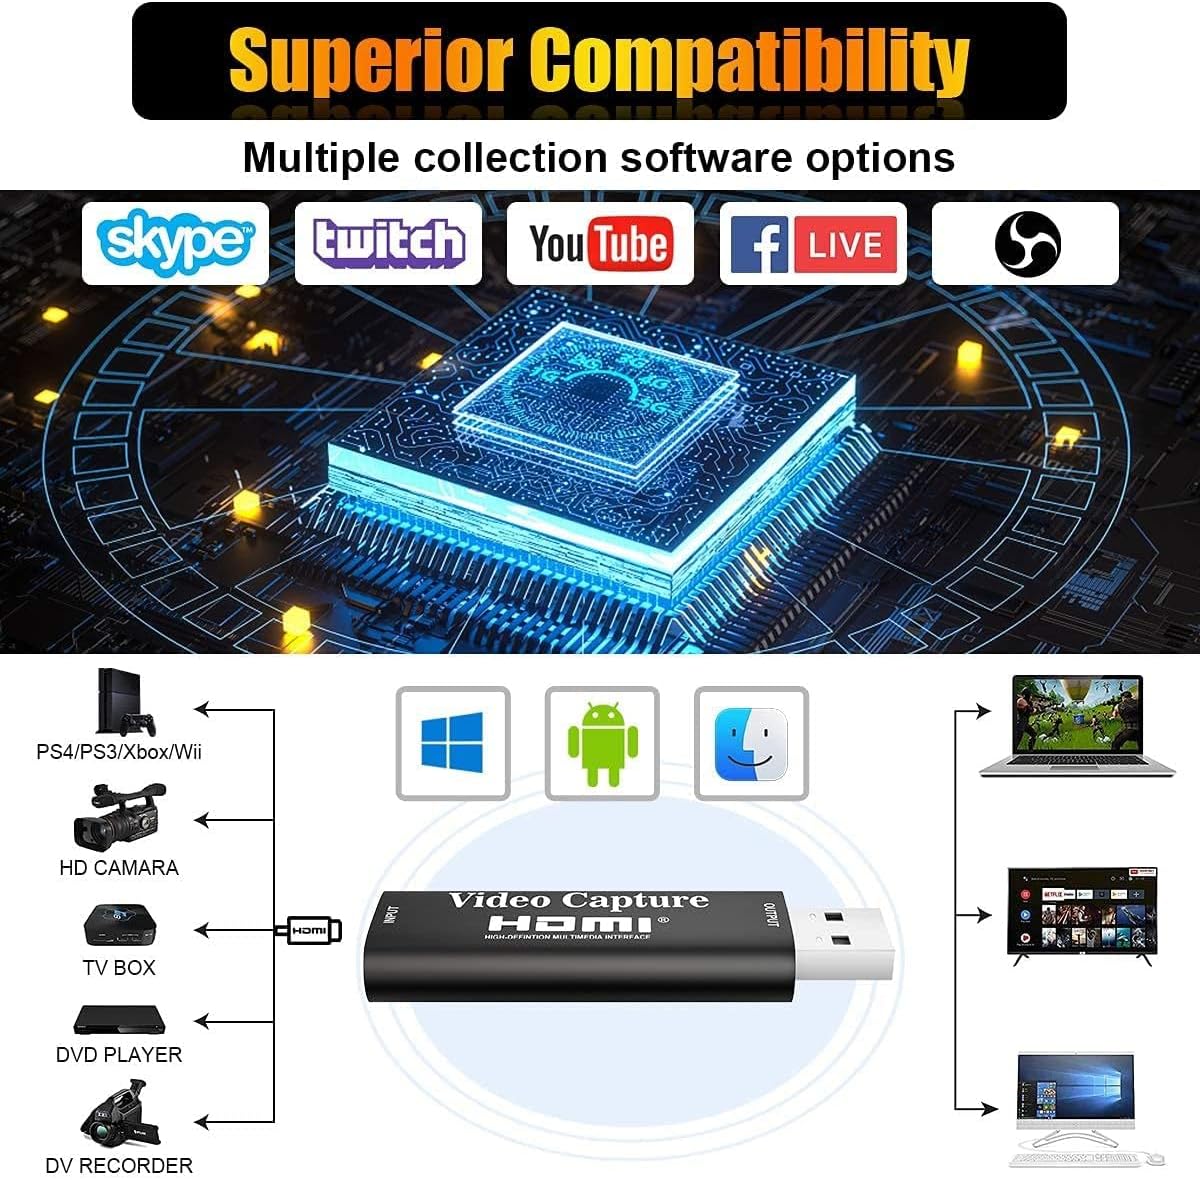 DIGITNOW HDMI Video Capture Card, 4K HDMI to USB 2.0 Video Audio Converter, Full HD 1080p for Editing Video/Games/Streaming/Online Teaching